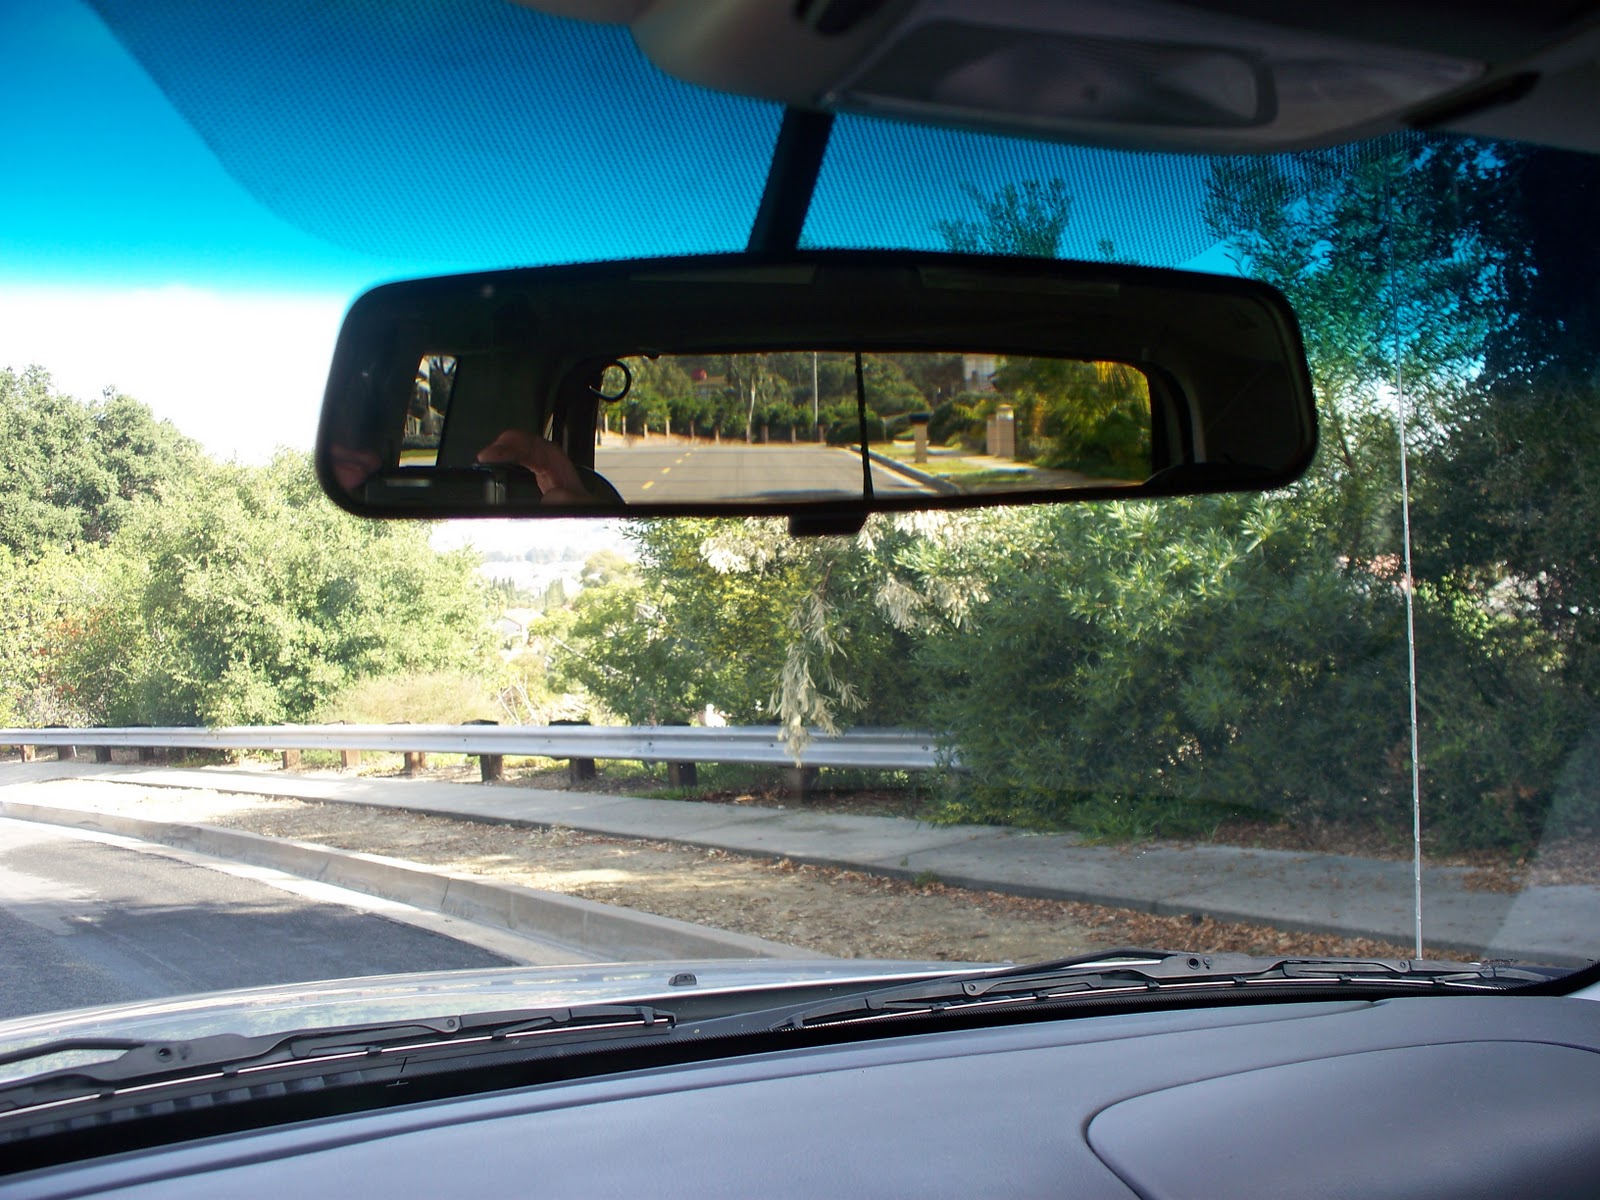 Traveling Lighter: The Rear View Mirror